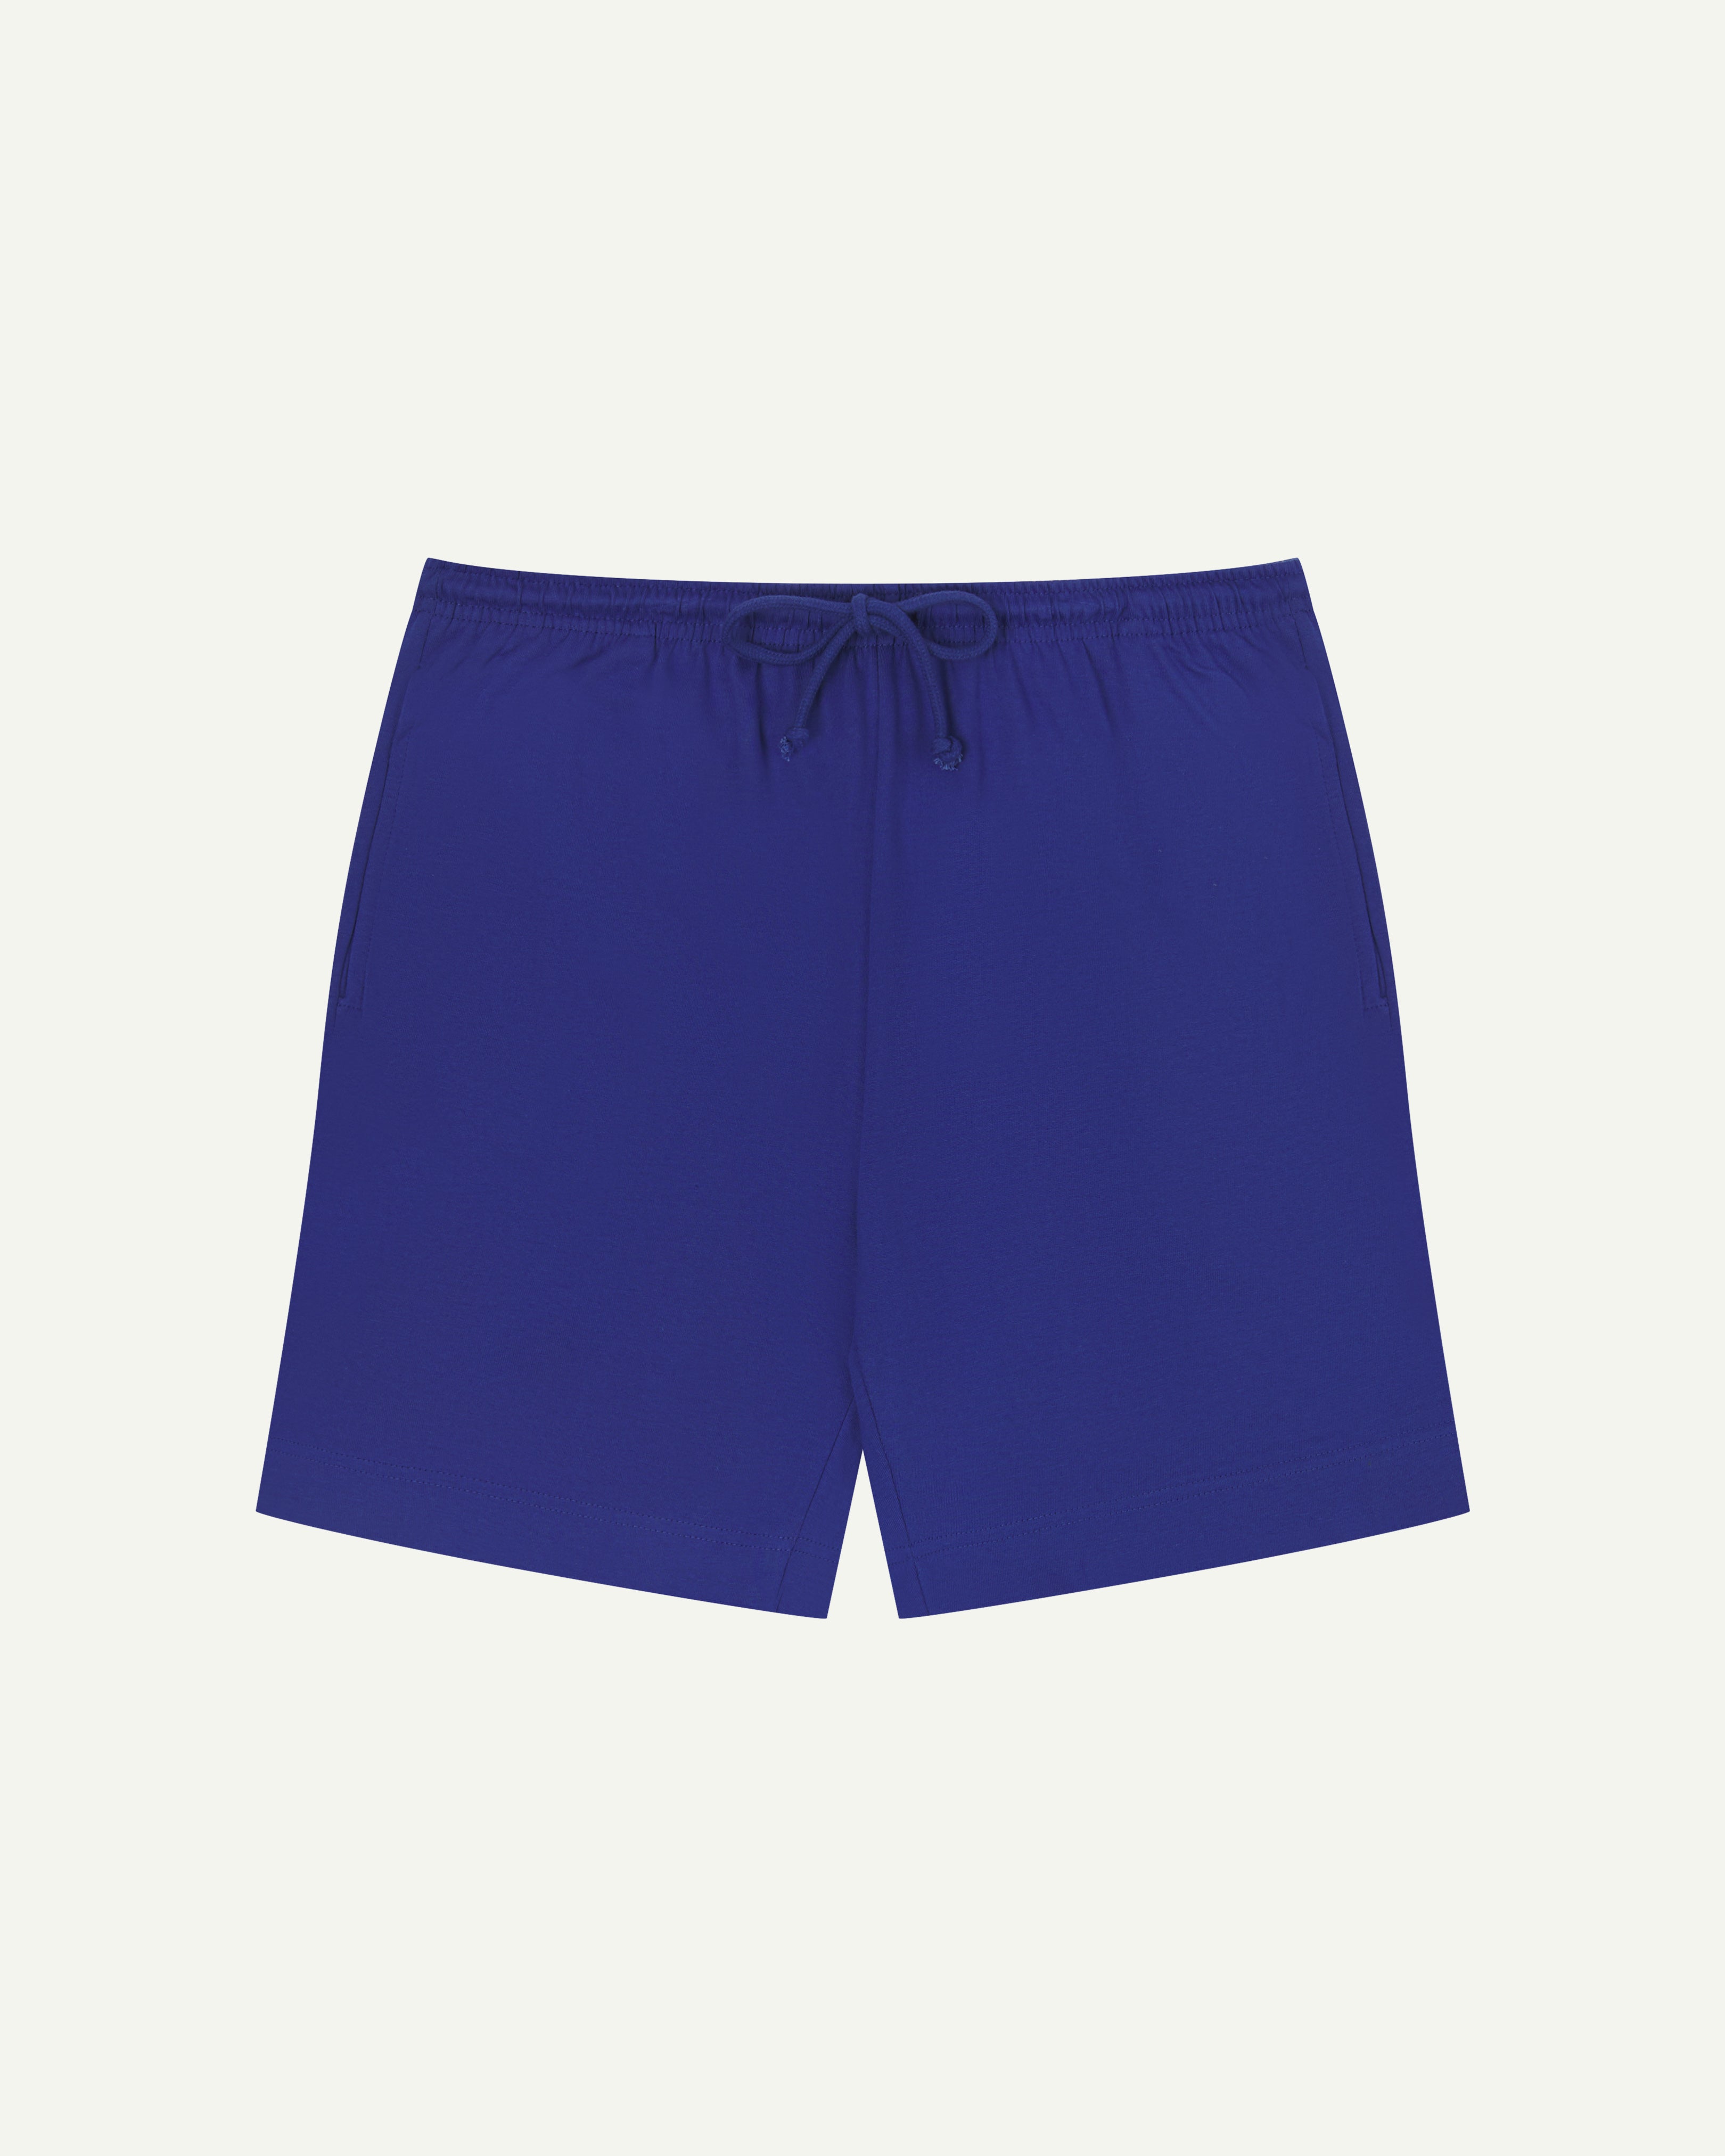 Front view of bright blue organic cotton #7007 men's shorts by Uskees against white background. Clear view of drawstring waist.